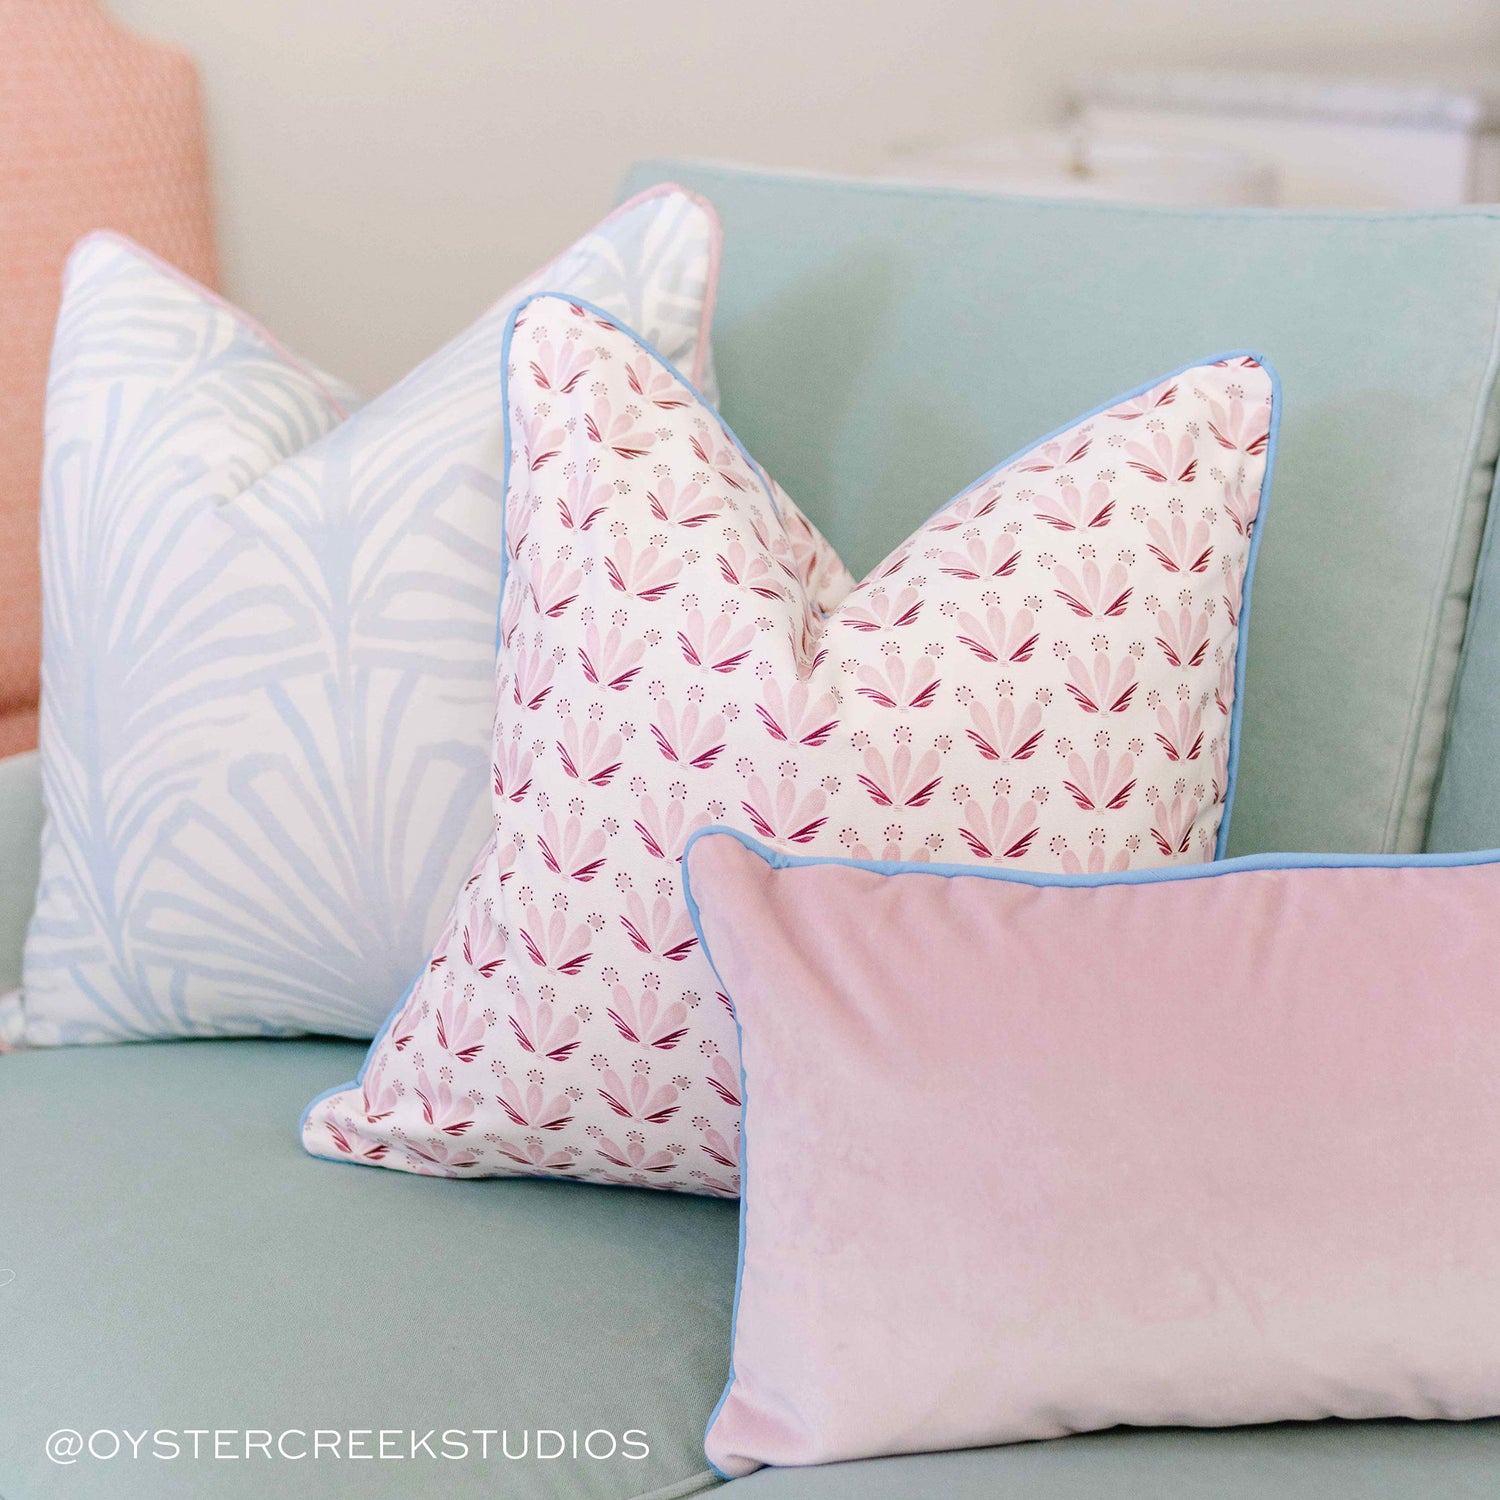 Close-up of Sky Blue Palm Printed Pillow, Pink & Burgundy Drop Repeat Floral Printed Pillow, and Pink Velvet Lumbar on a Blue Green Couch. Photo taken by Oyster Creek Studios